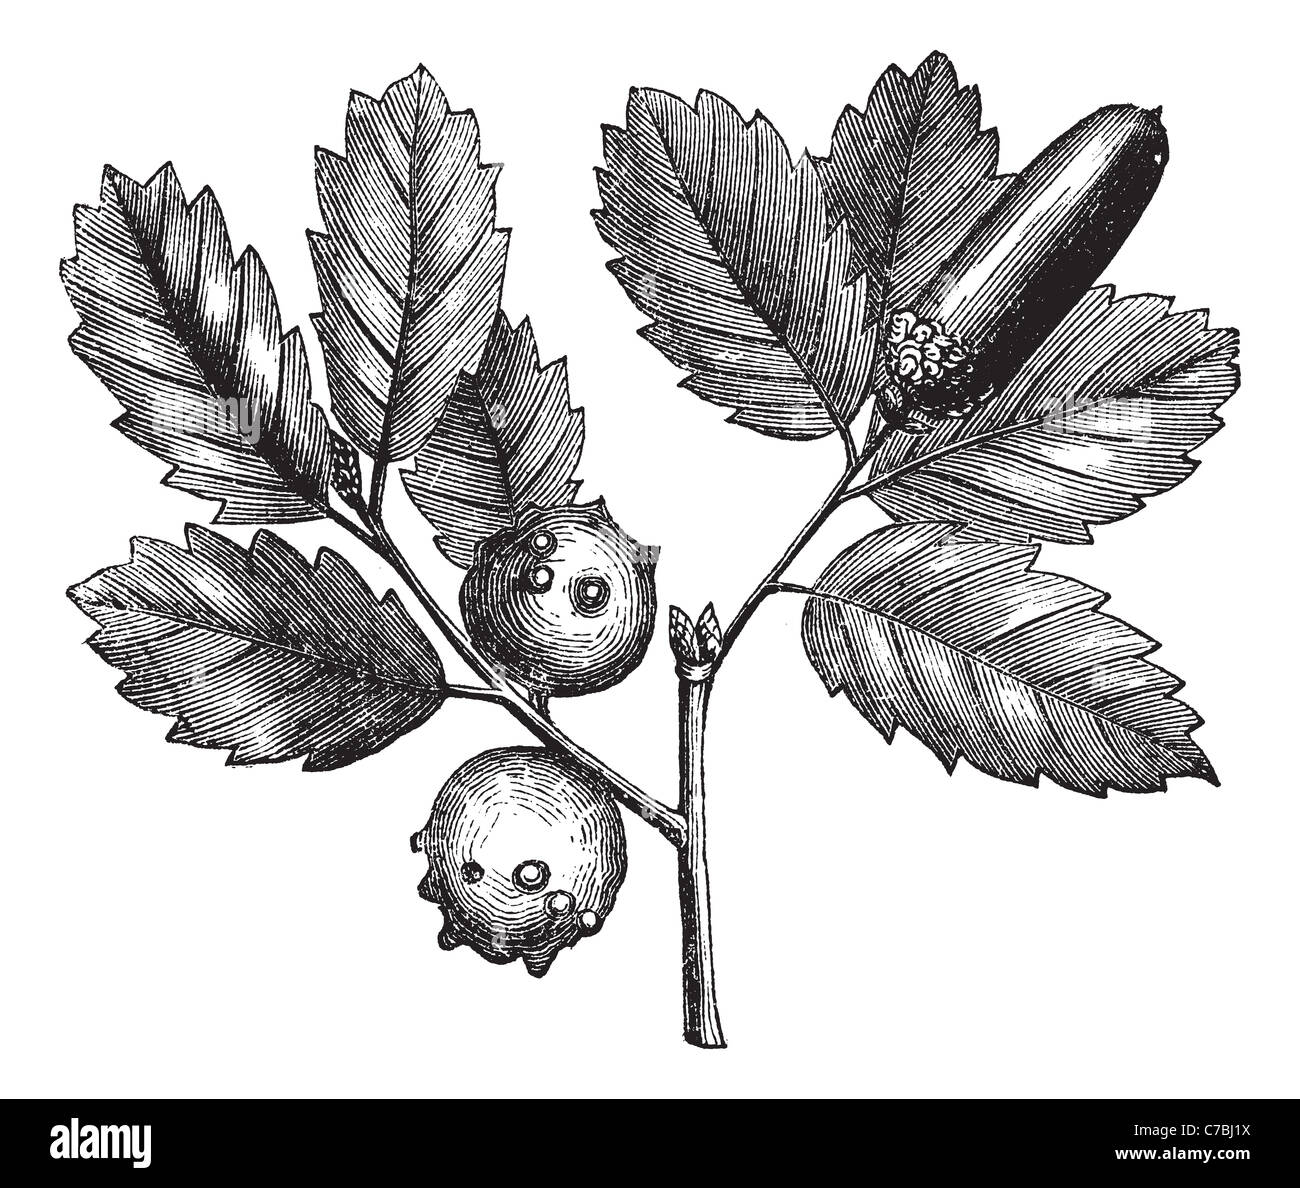 Quercus lusitanica or Gall Oak or Lusitanian Oak or Dyer's Oak or Quercus infectoria Olivier, vintage engraving. Stock Photo